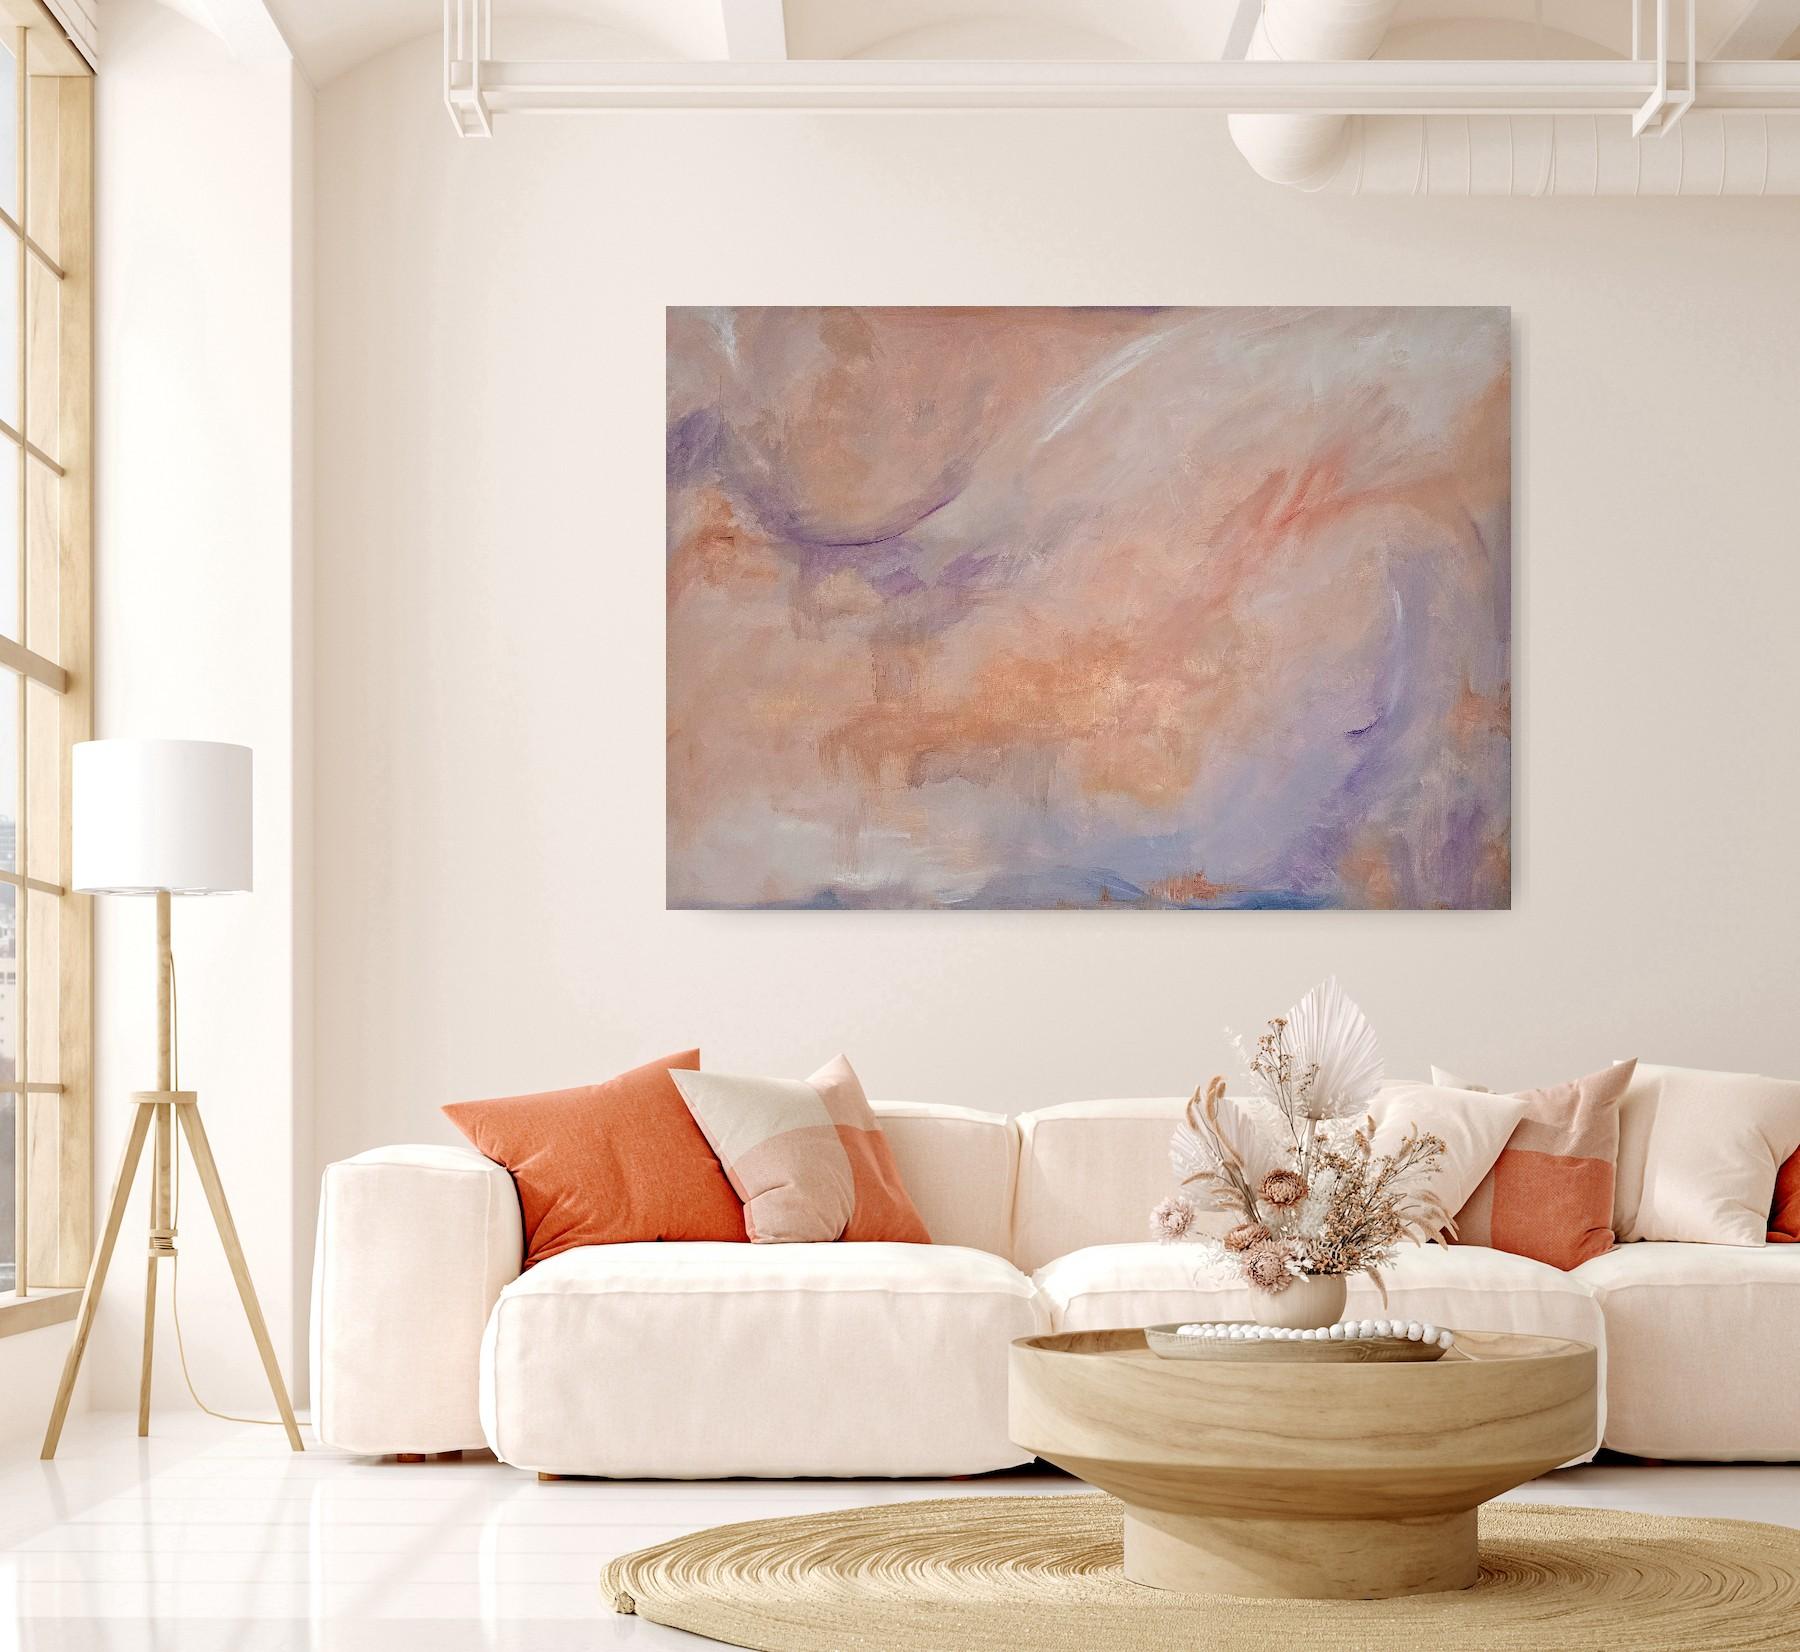 Avalon - Large tranquil peach color abstract painting - Abstract Expressionist Painting by Jennifer L. Baker